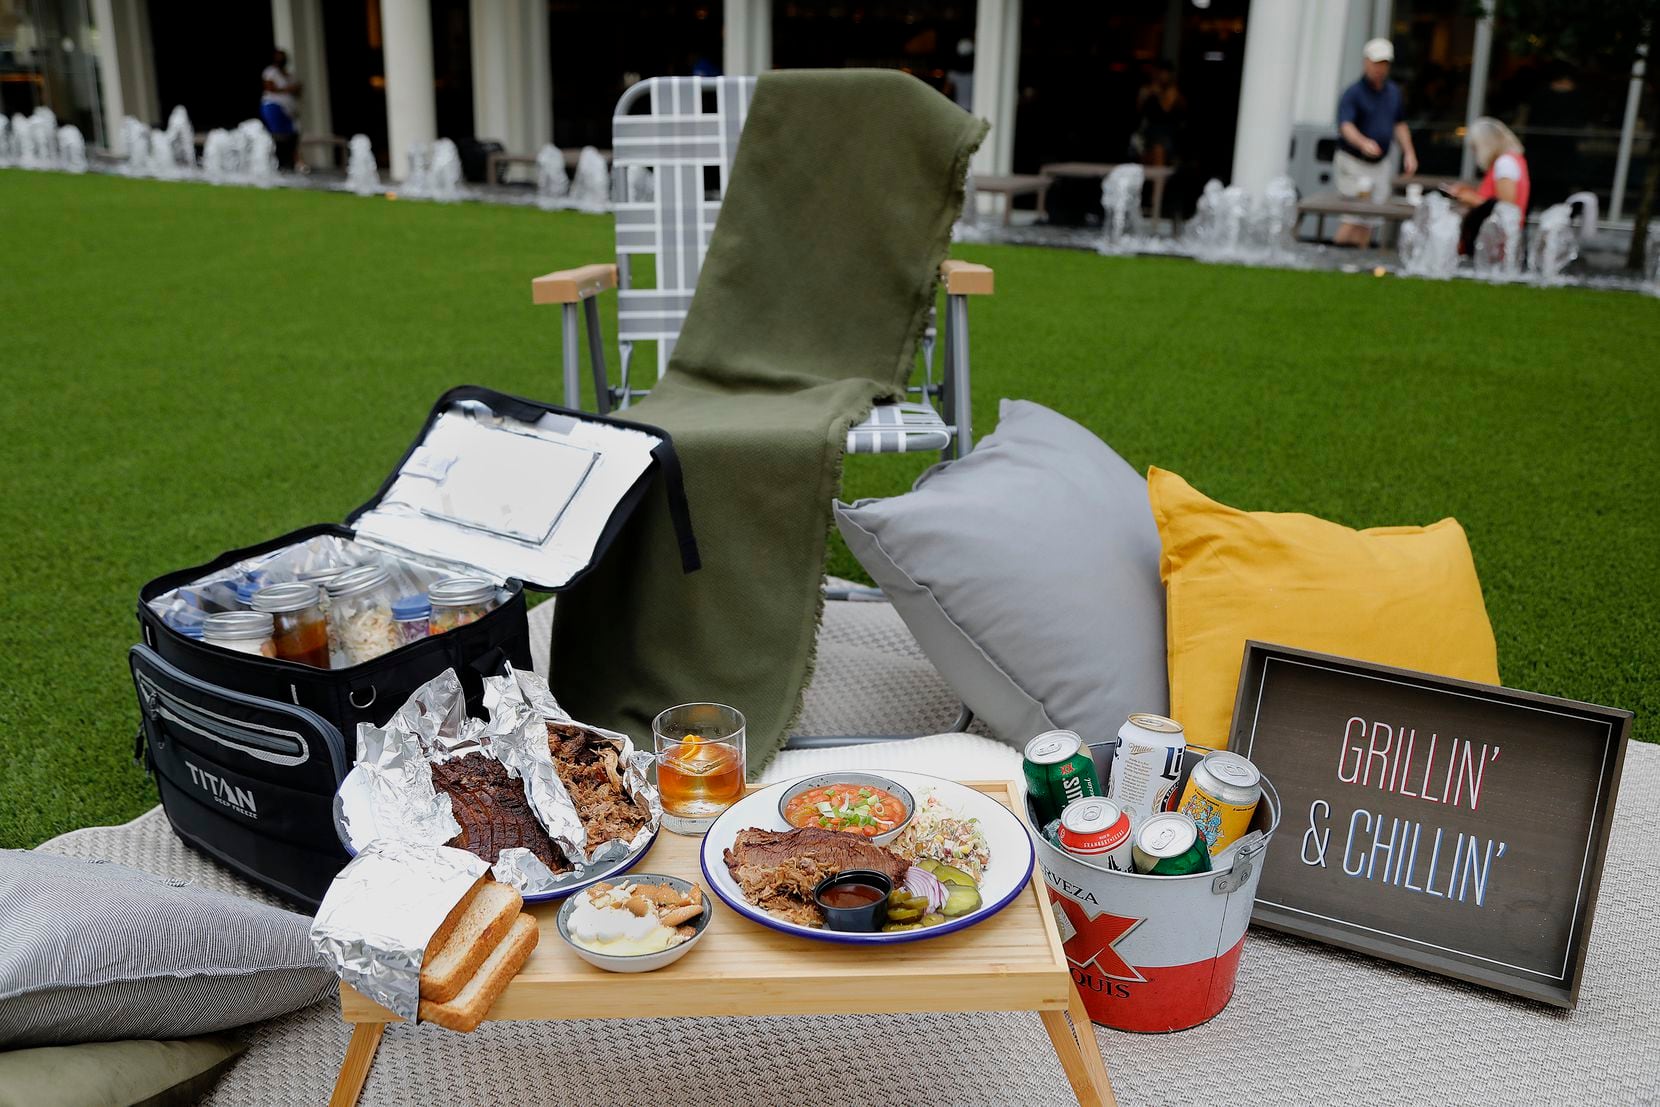 Jaxon Texas Kitchen and Beer Garden offers the Father’s Day cooler special, which can be set up on the lawn of the lawn of the A&T Discovery District in downtown Dallas.